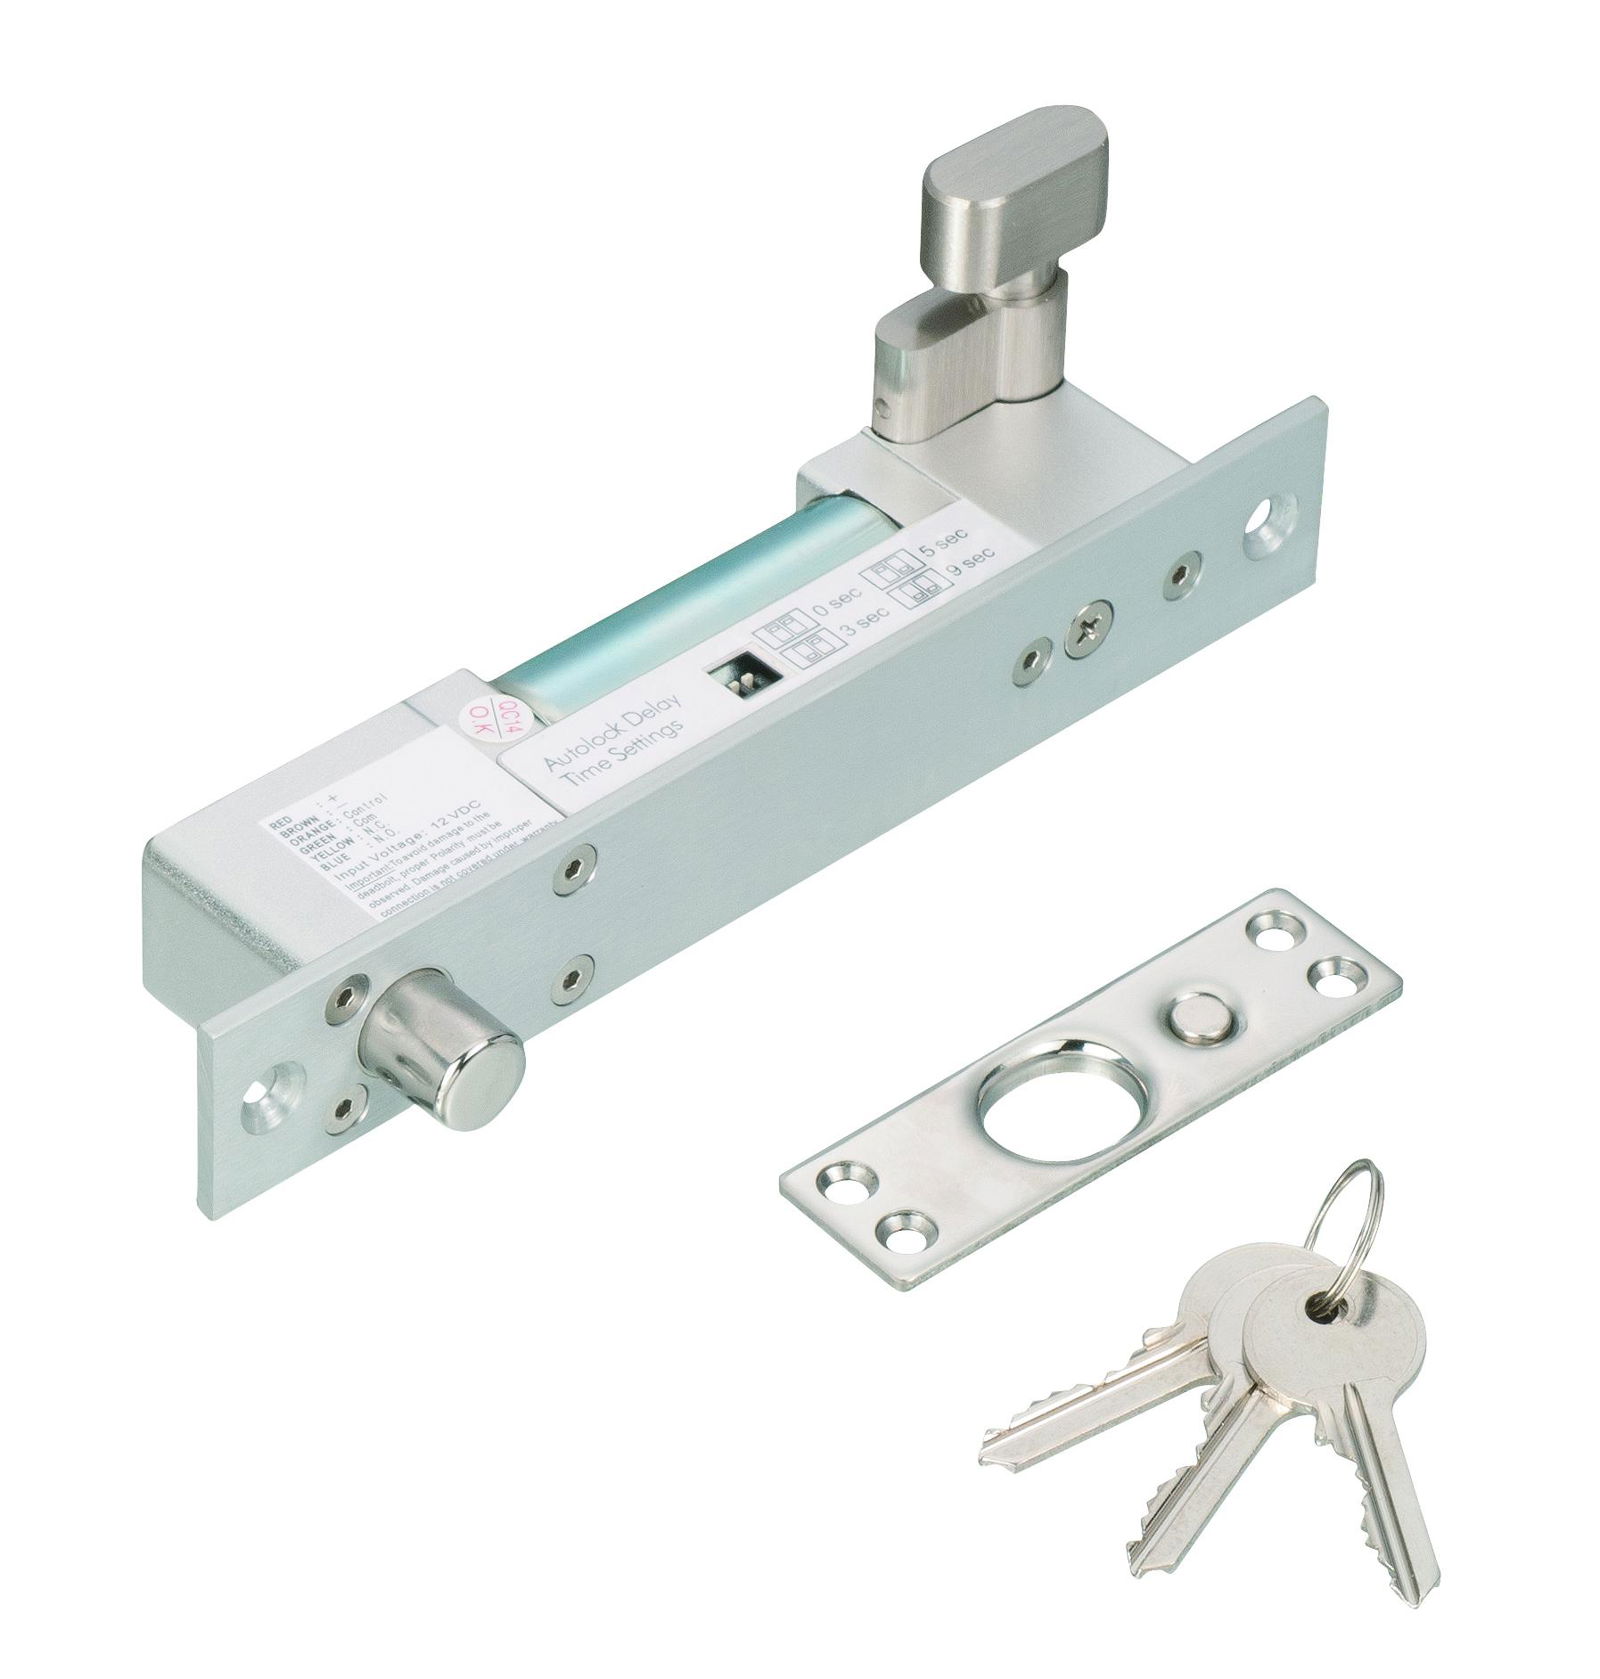  High Quality Fail Secure Electric Sturdiness Bolt Lock Time delay  3